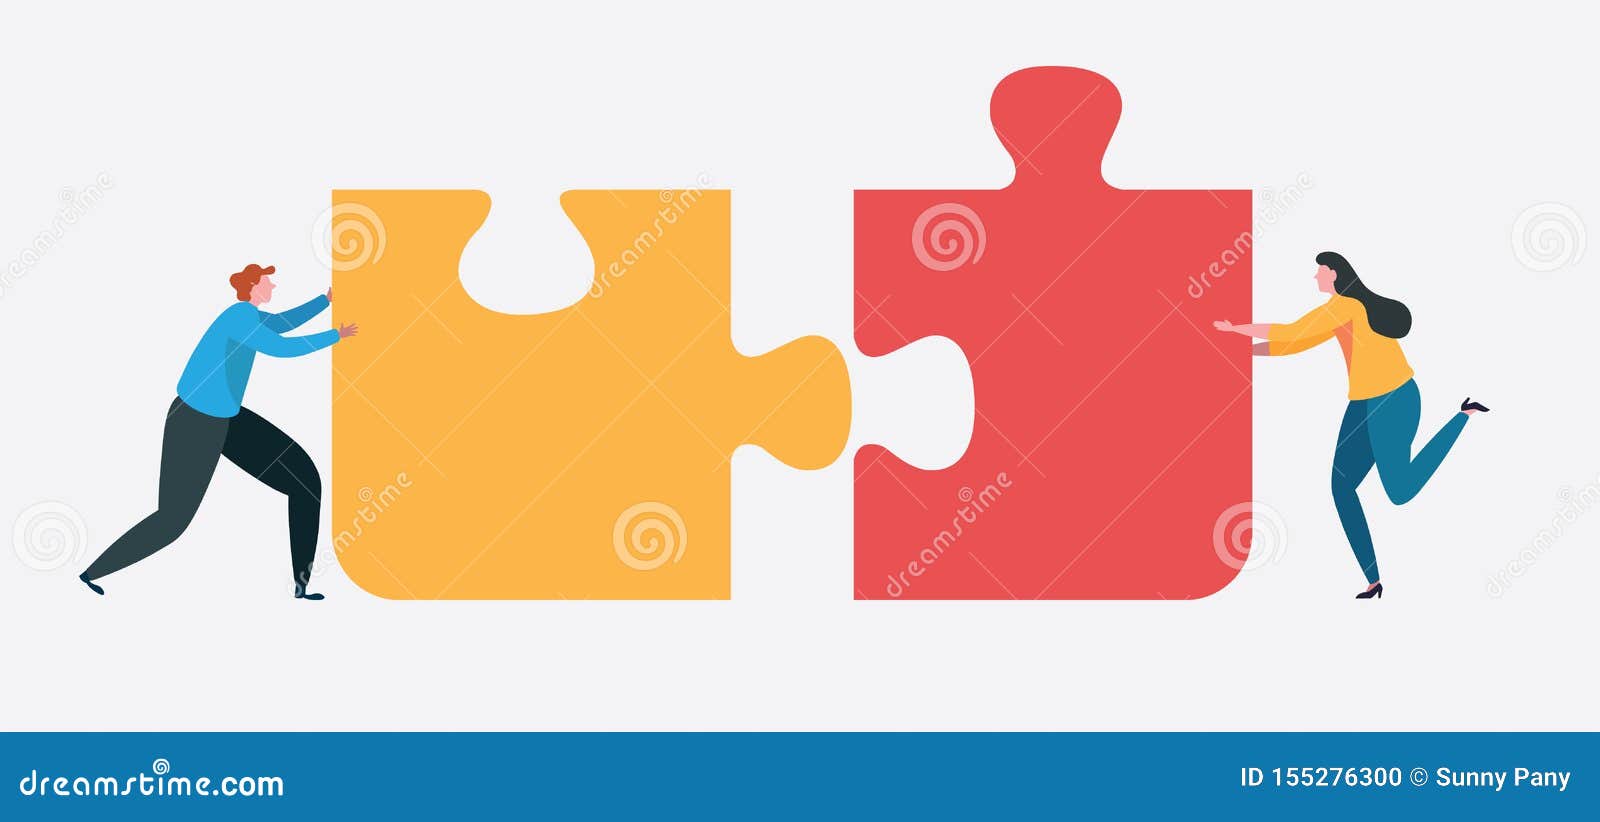 teamwork successful together concept. marketing content. business people holding the big jigsaw puzzle piece. flat cartoon